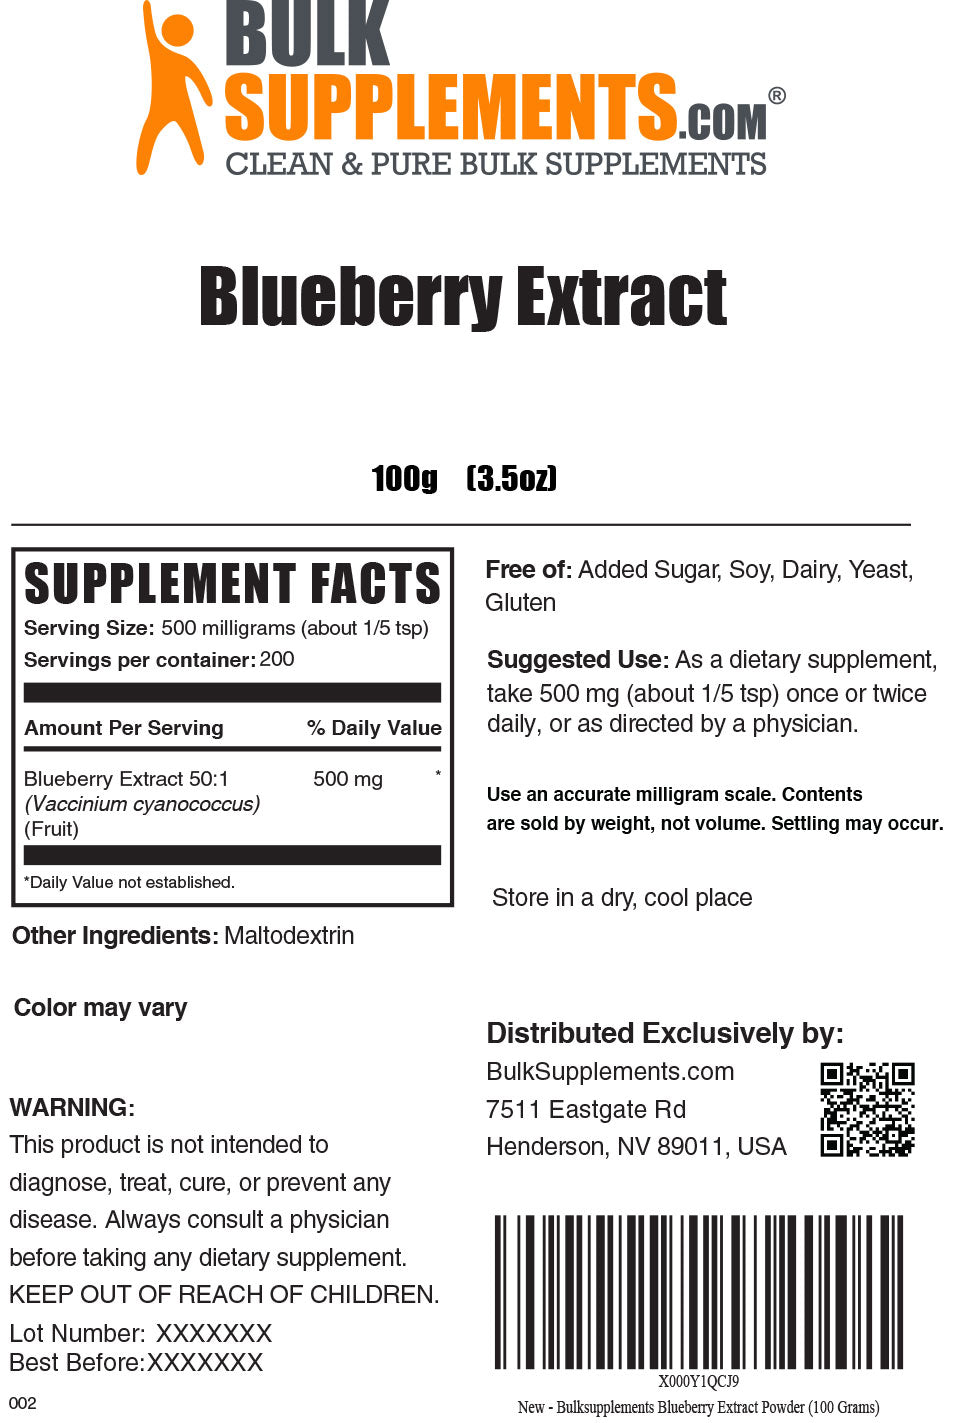 100g of Blueberry Extract Supplement Facts